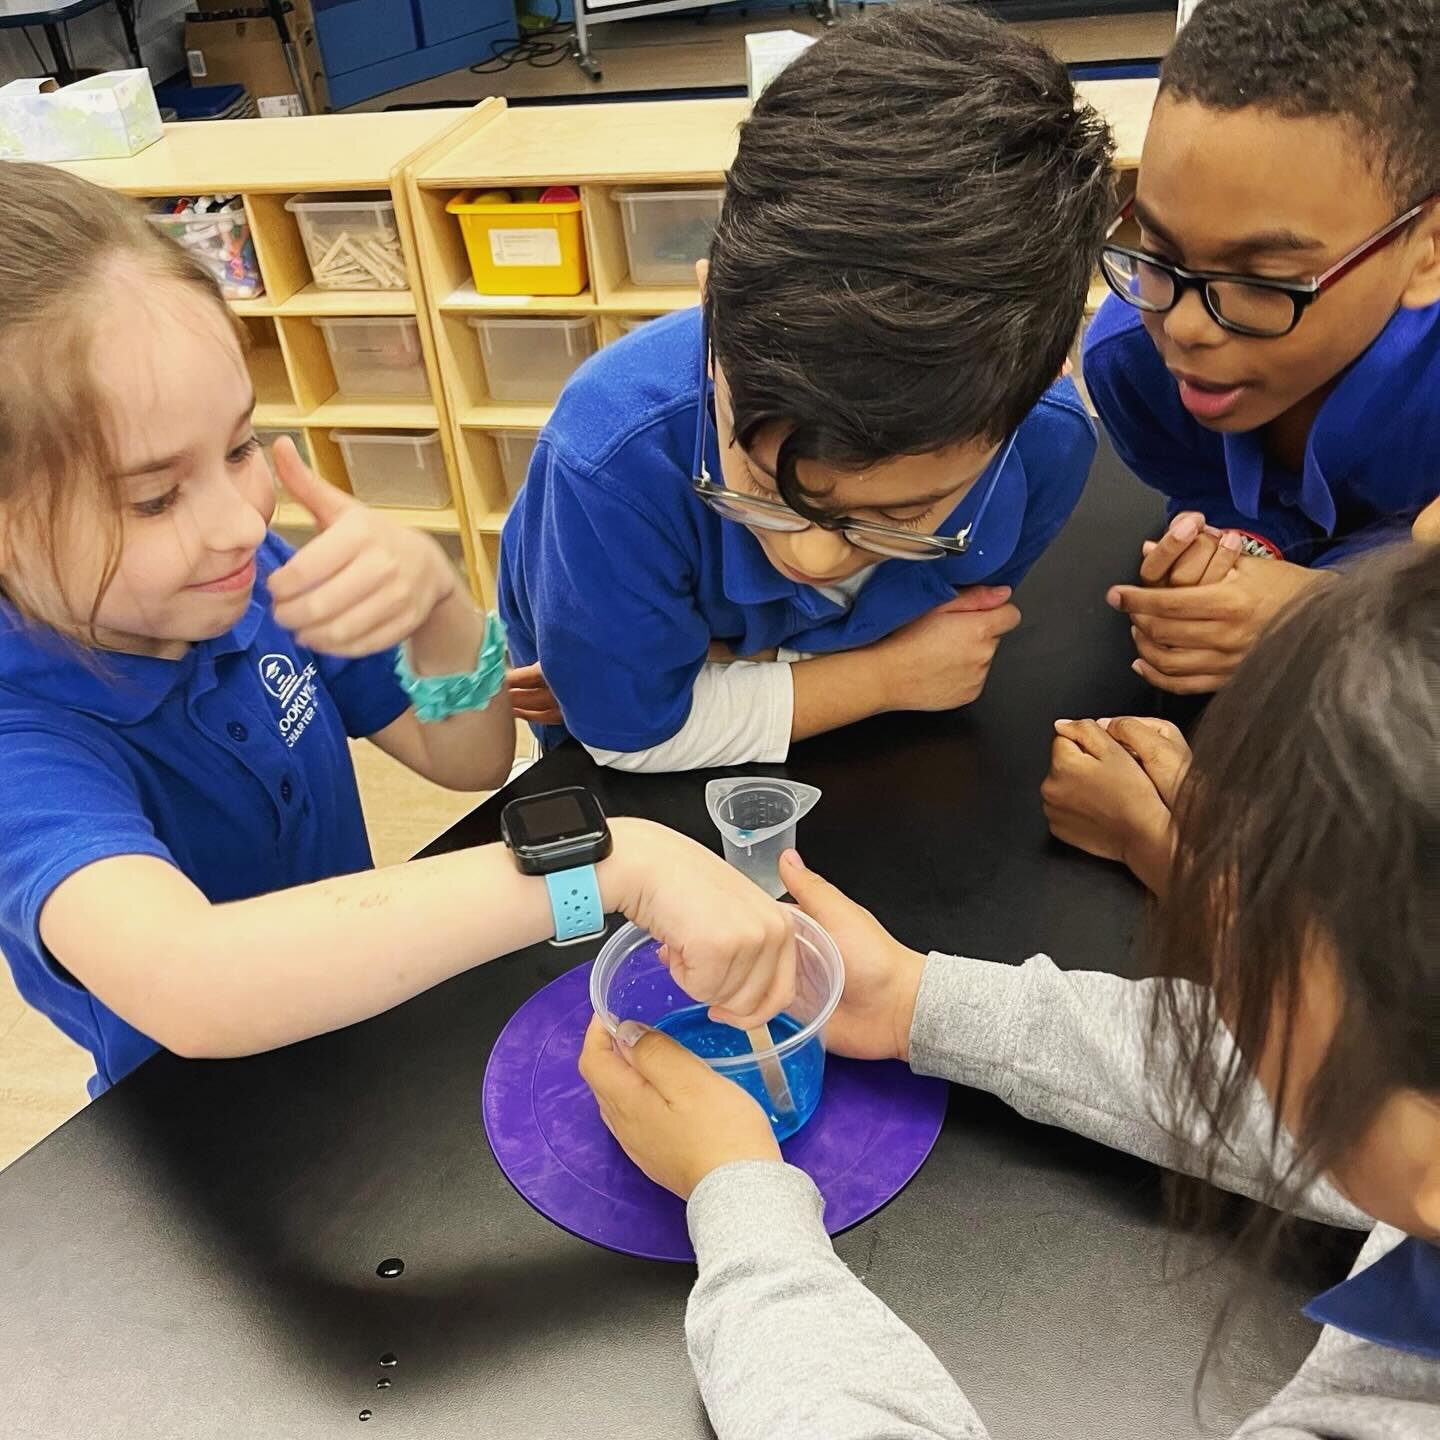 This #WonderfulWednesday is dedicated to our young Brooklyn RISE scientists who have been busy exploring scientific concepts during hands-on science investigations! 👩🏽&zwj;🔬🧑🏽&zwj;🔬
.
Our second graders have been learning about states of matter